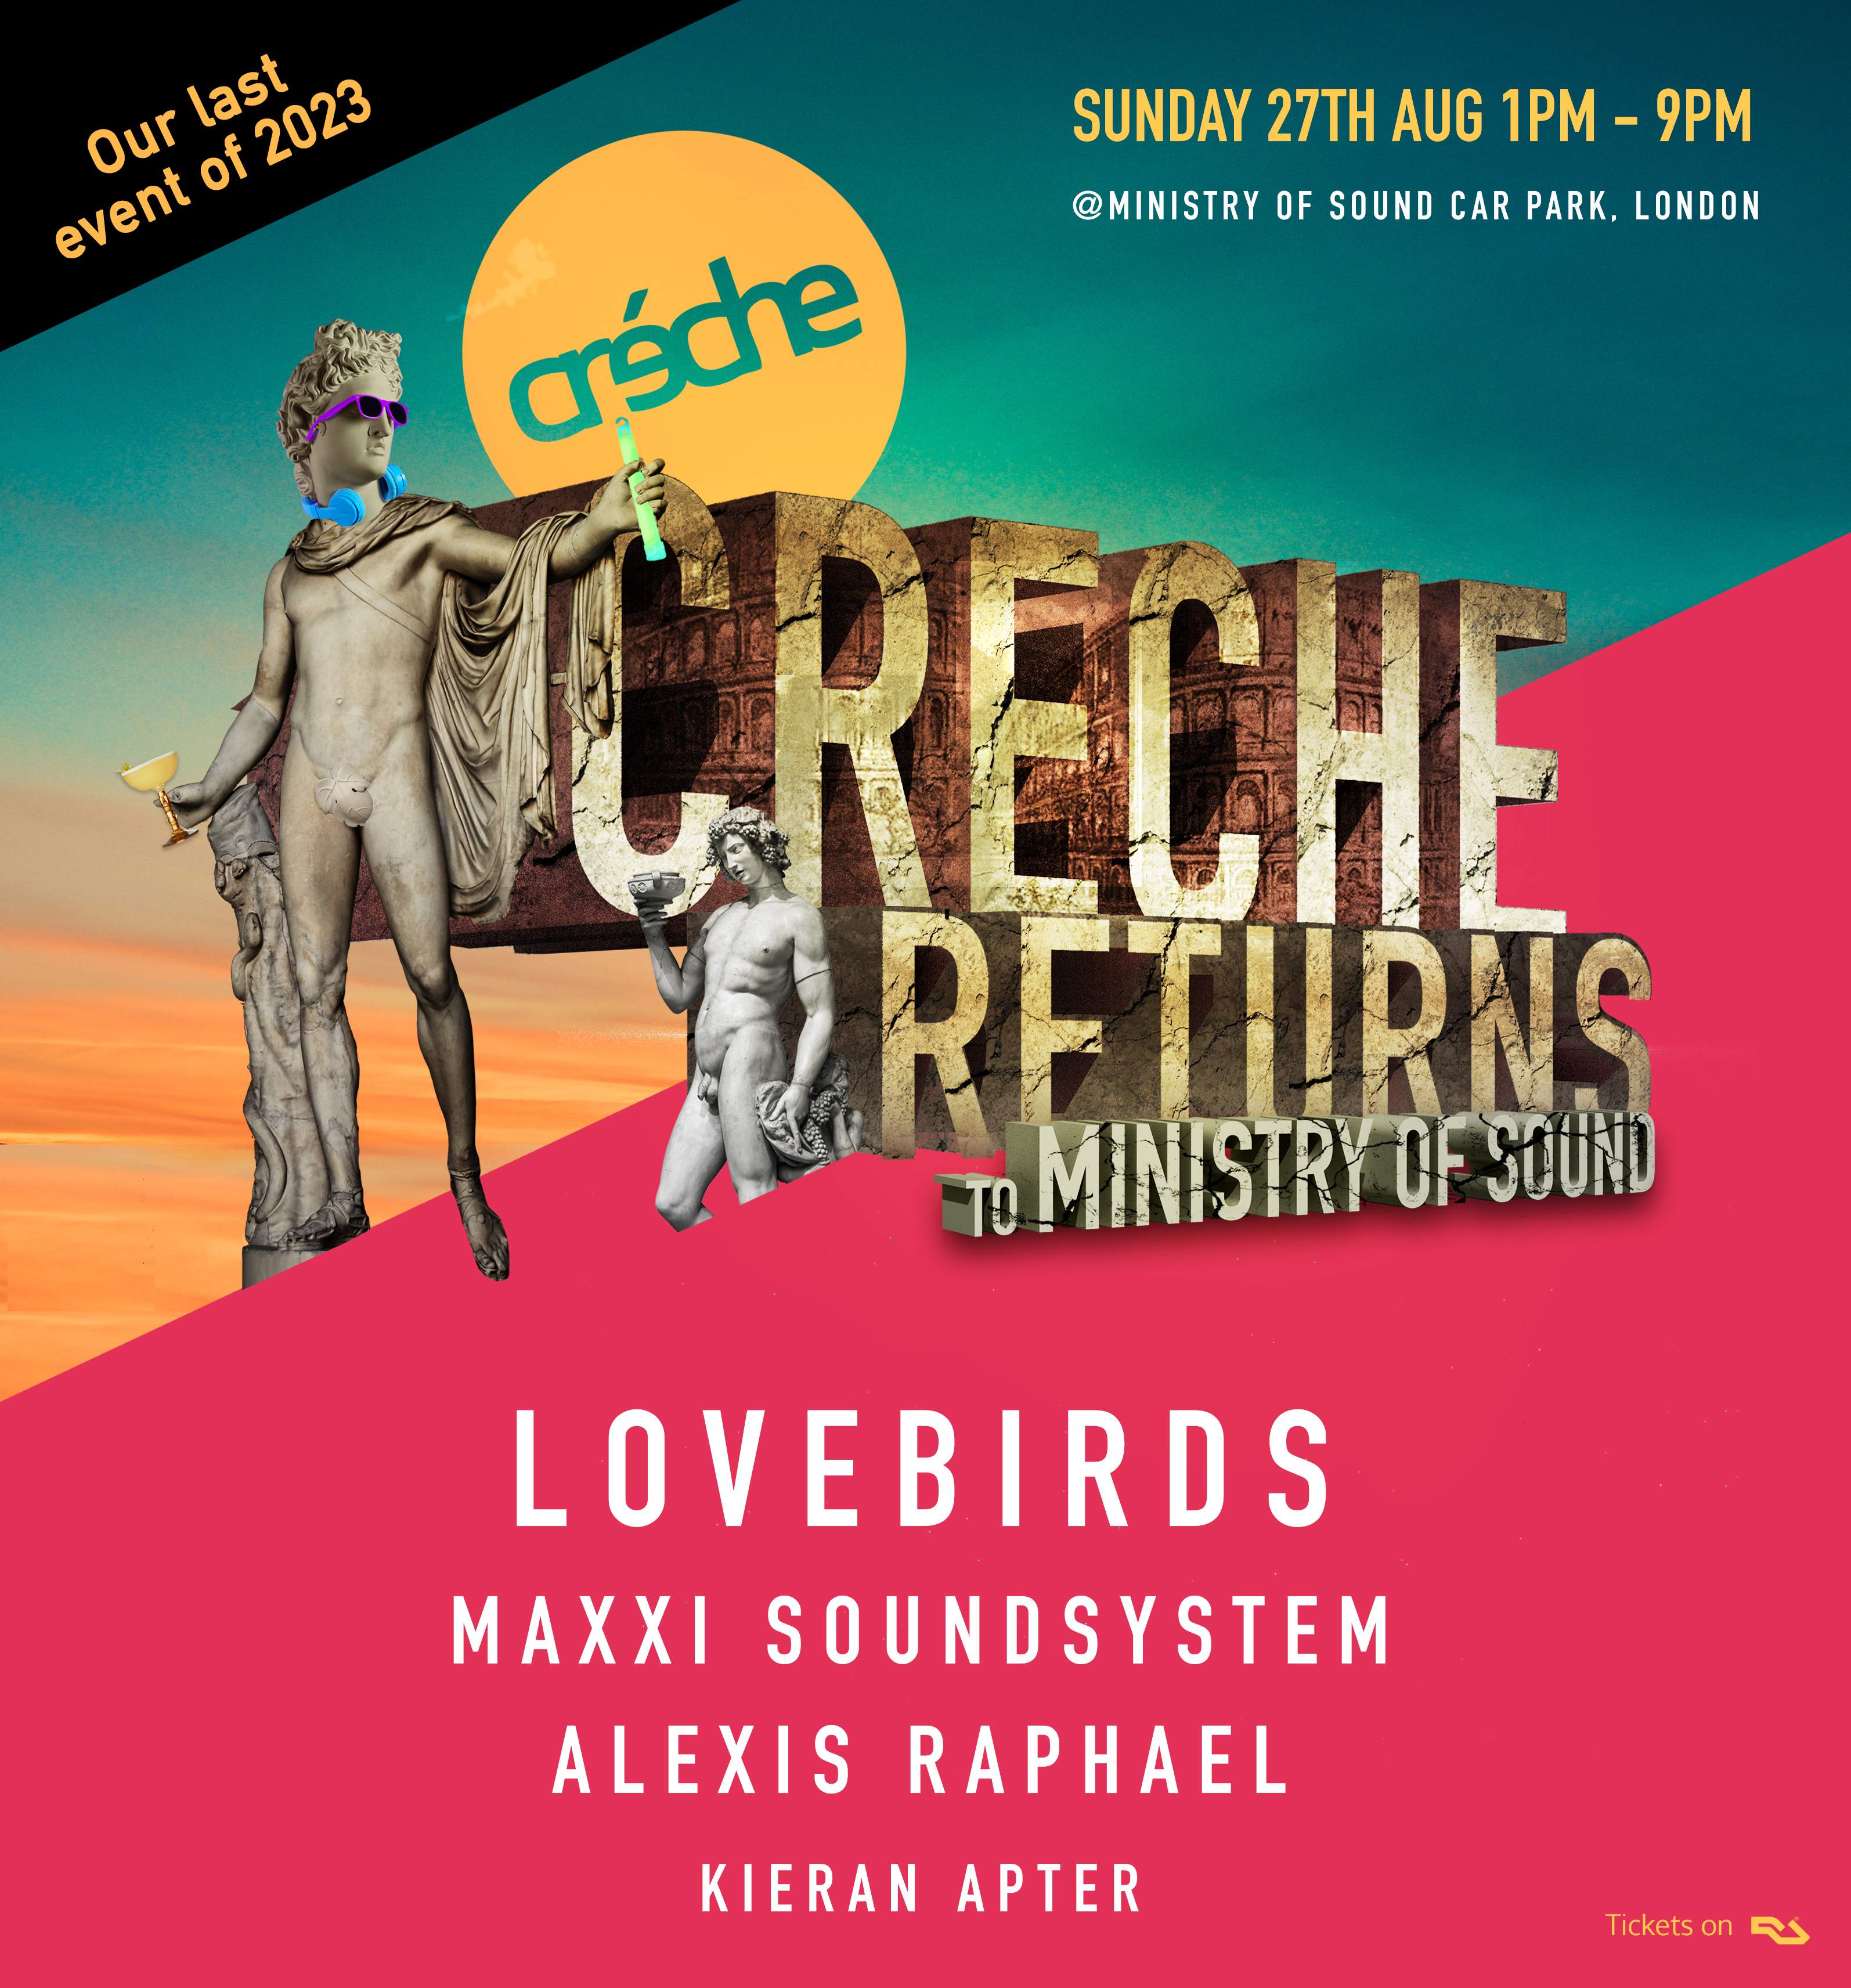 [CANCELLED] Creche All Day Outdoor Rave at Ministry Of Sound Car Park - フライヤー表